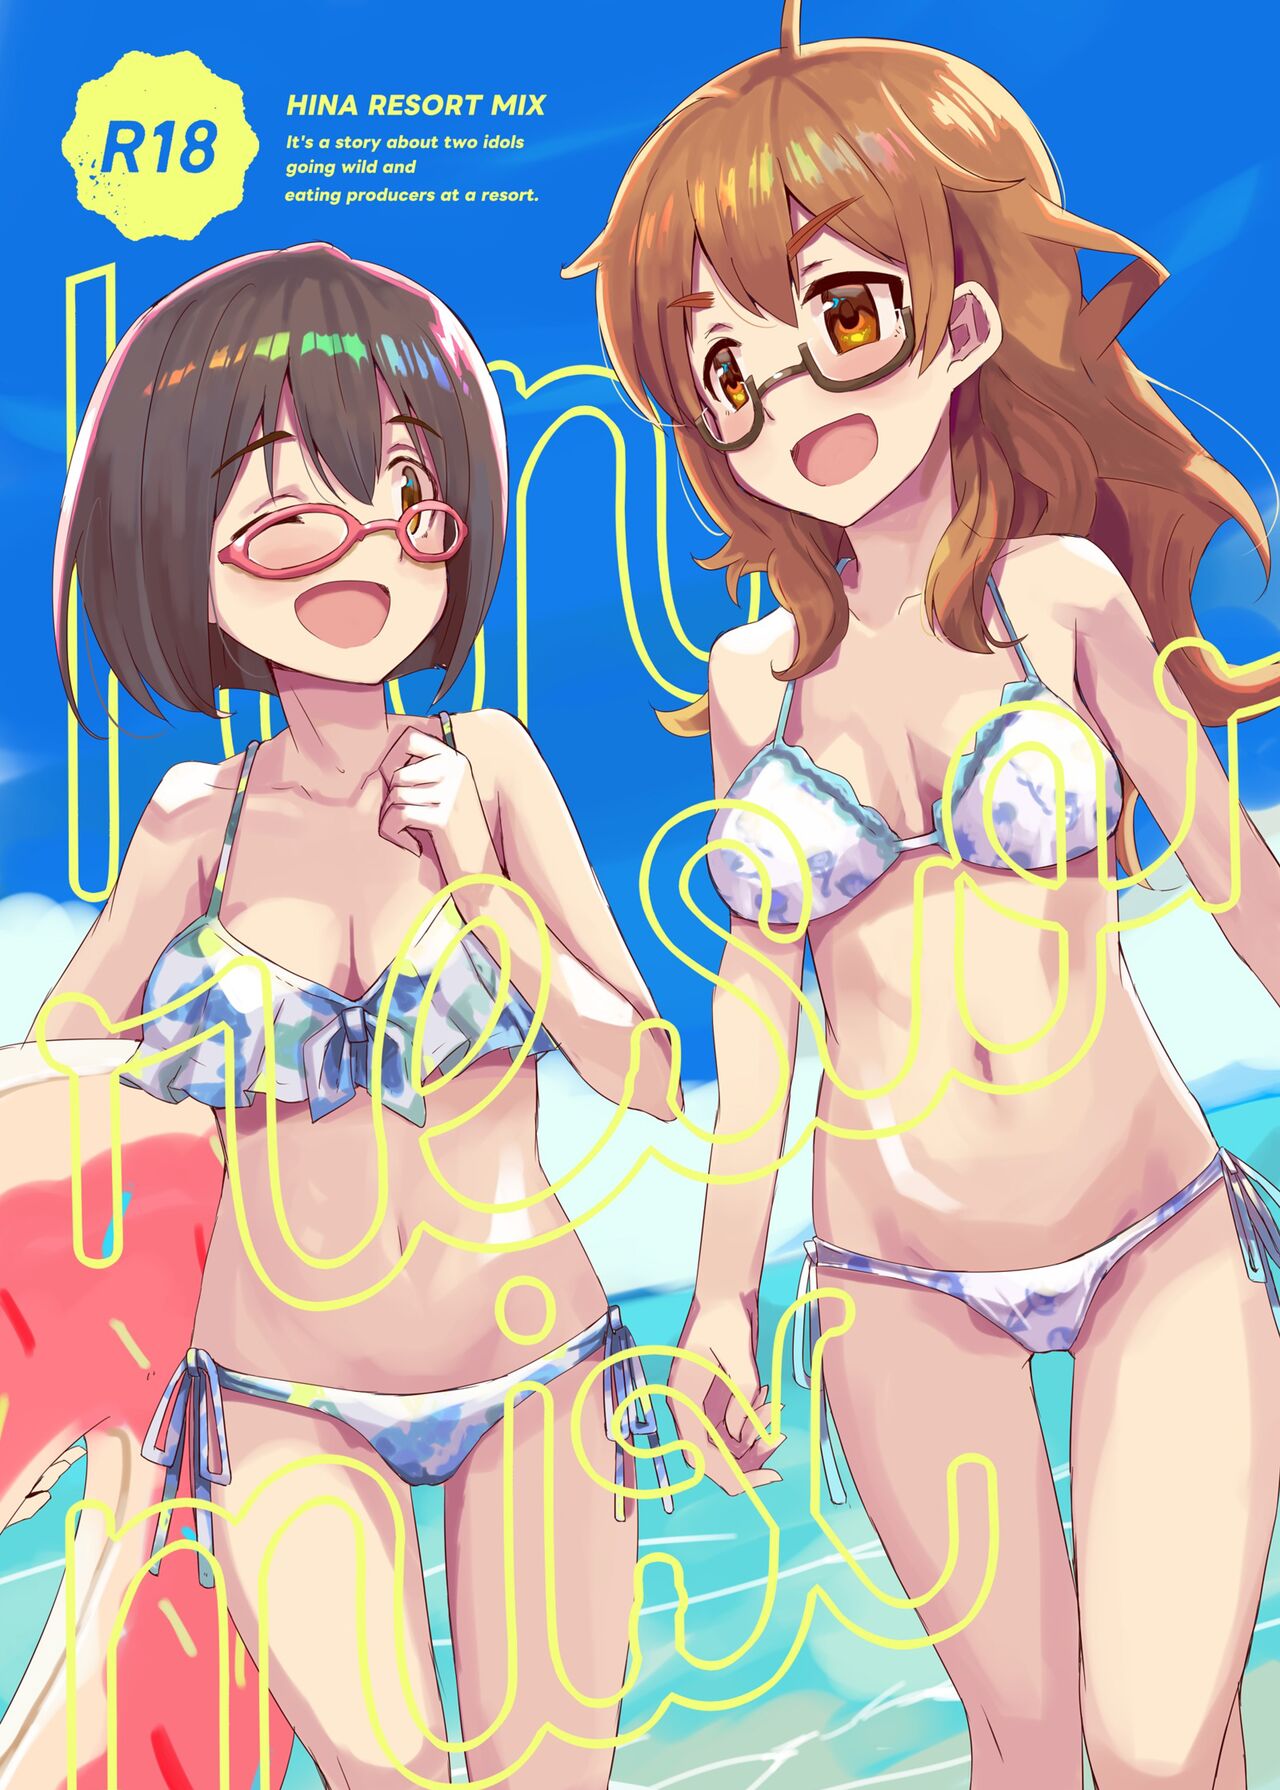 HINA RESORT MIX! – It’s a story about two idols going wild and eating producers at a resort.